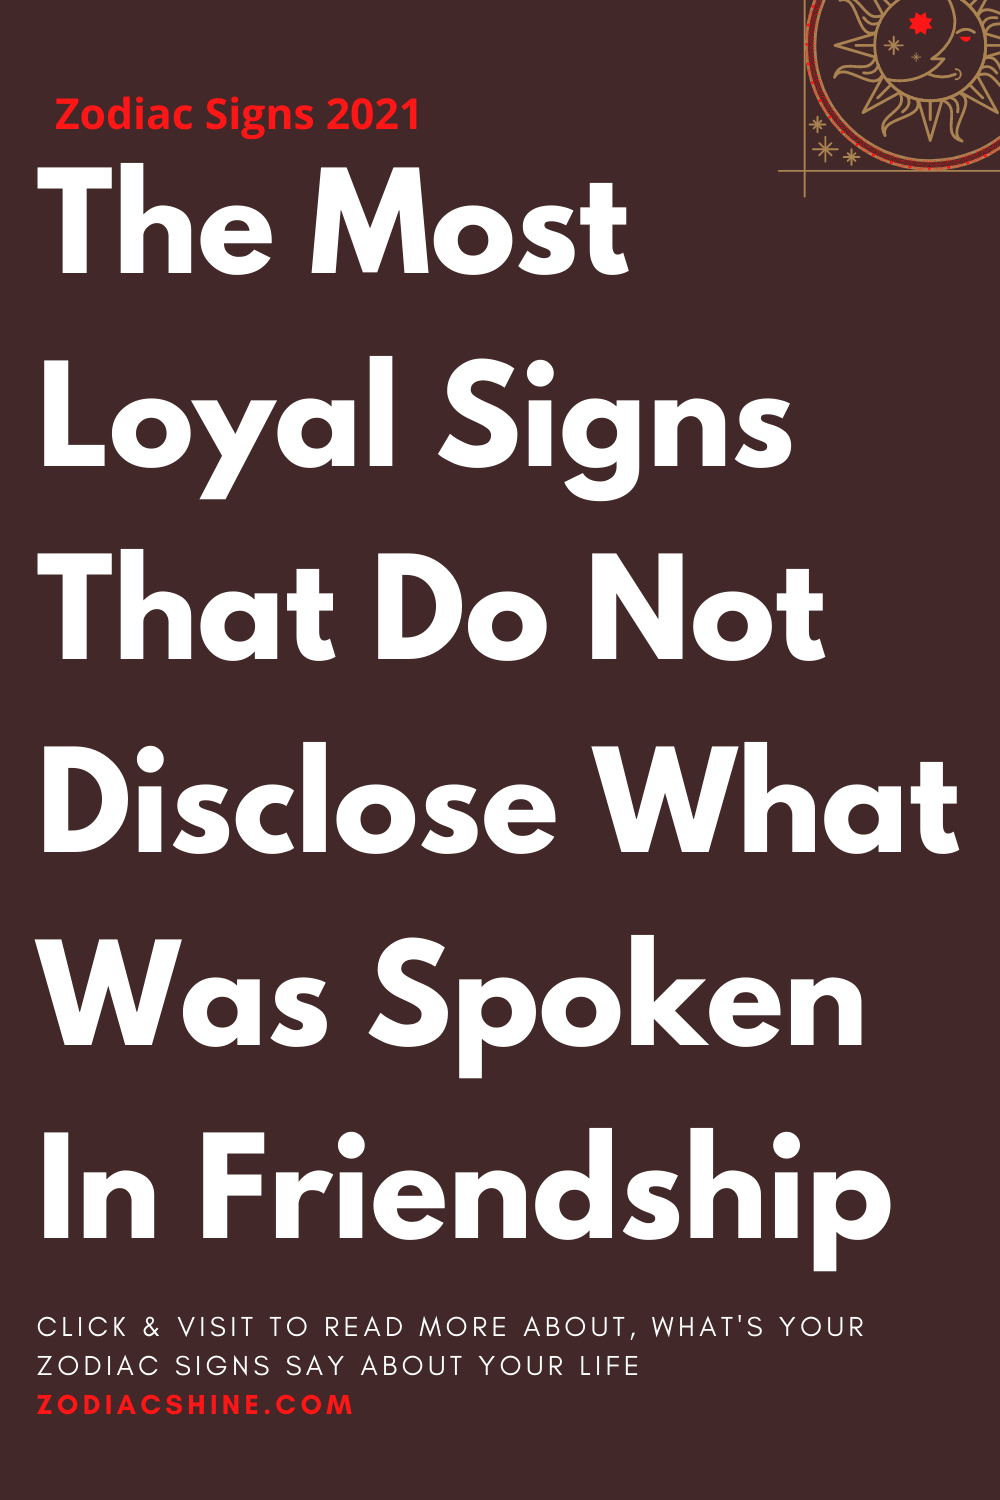 The Most Loyal Signs That Do Not Disclose What Was Spoken In Friendship